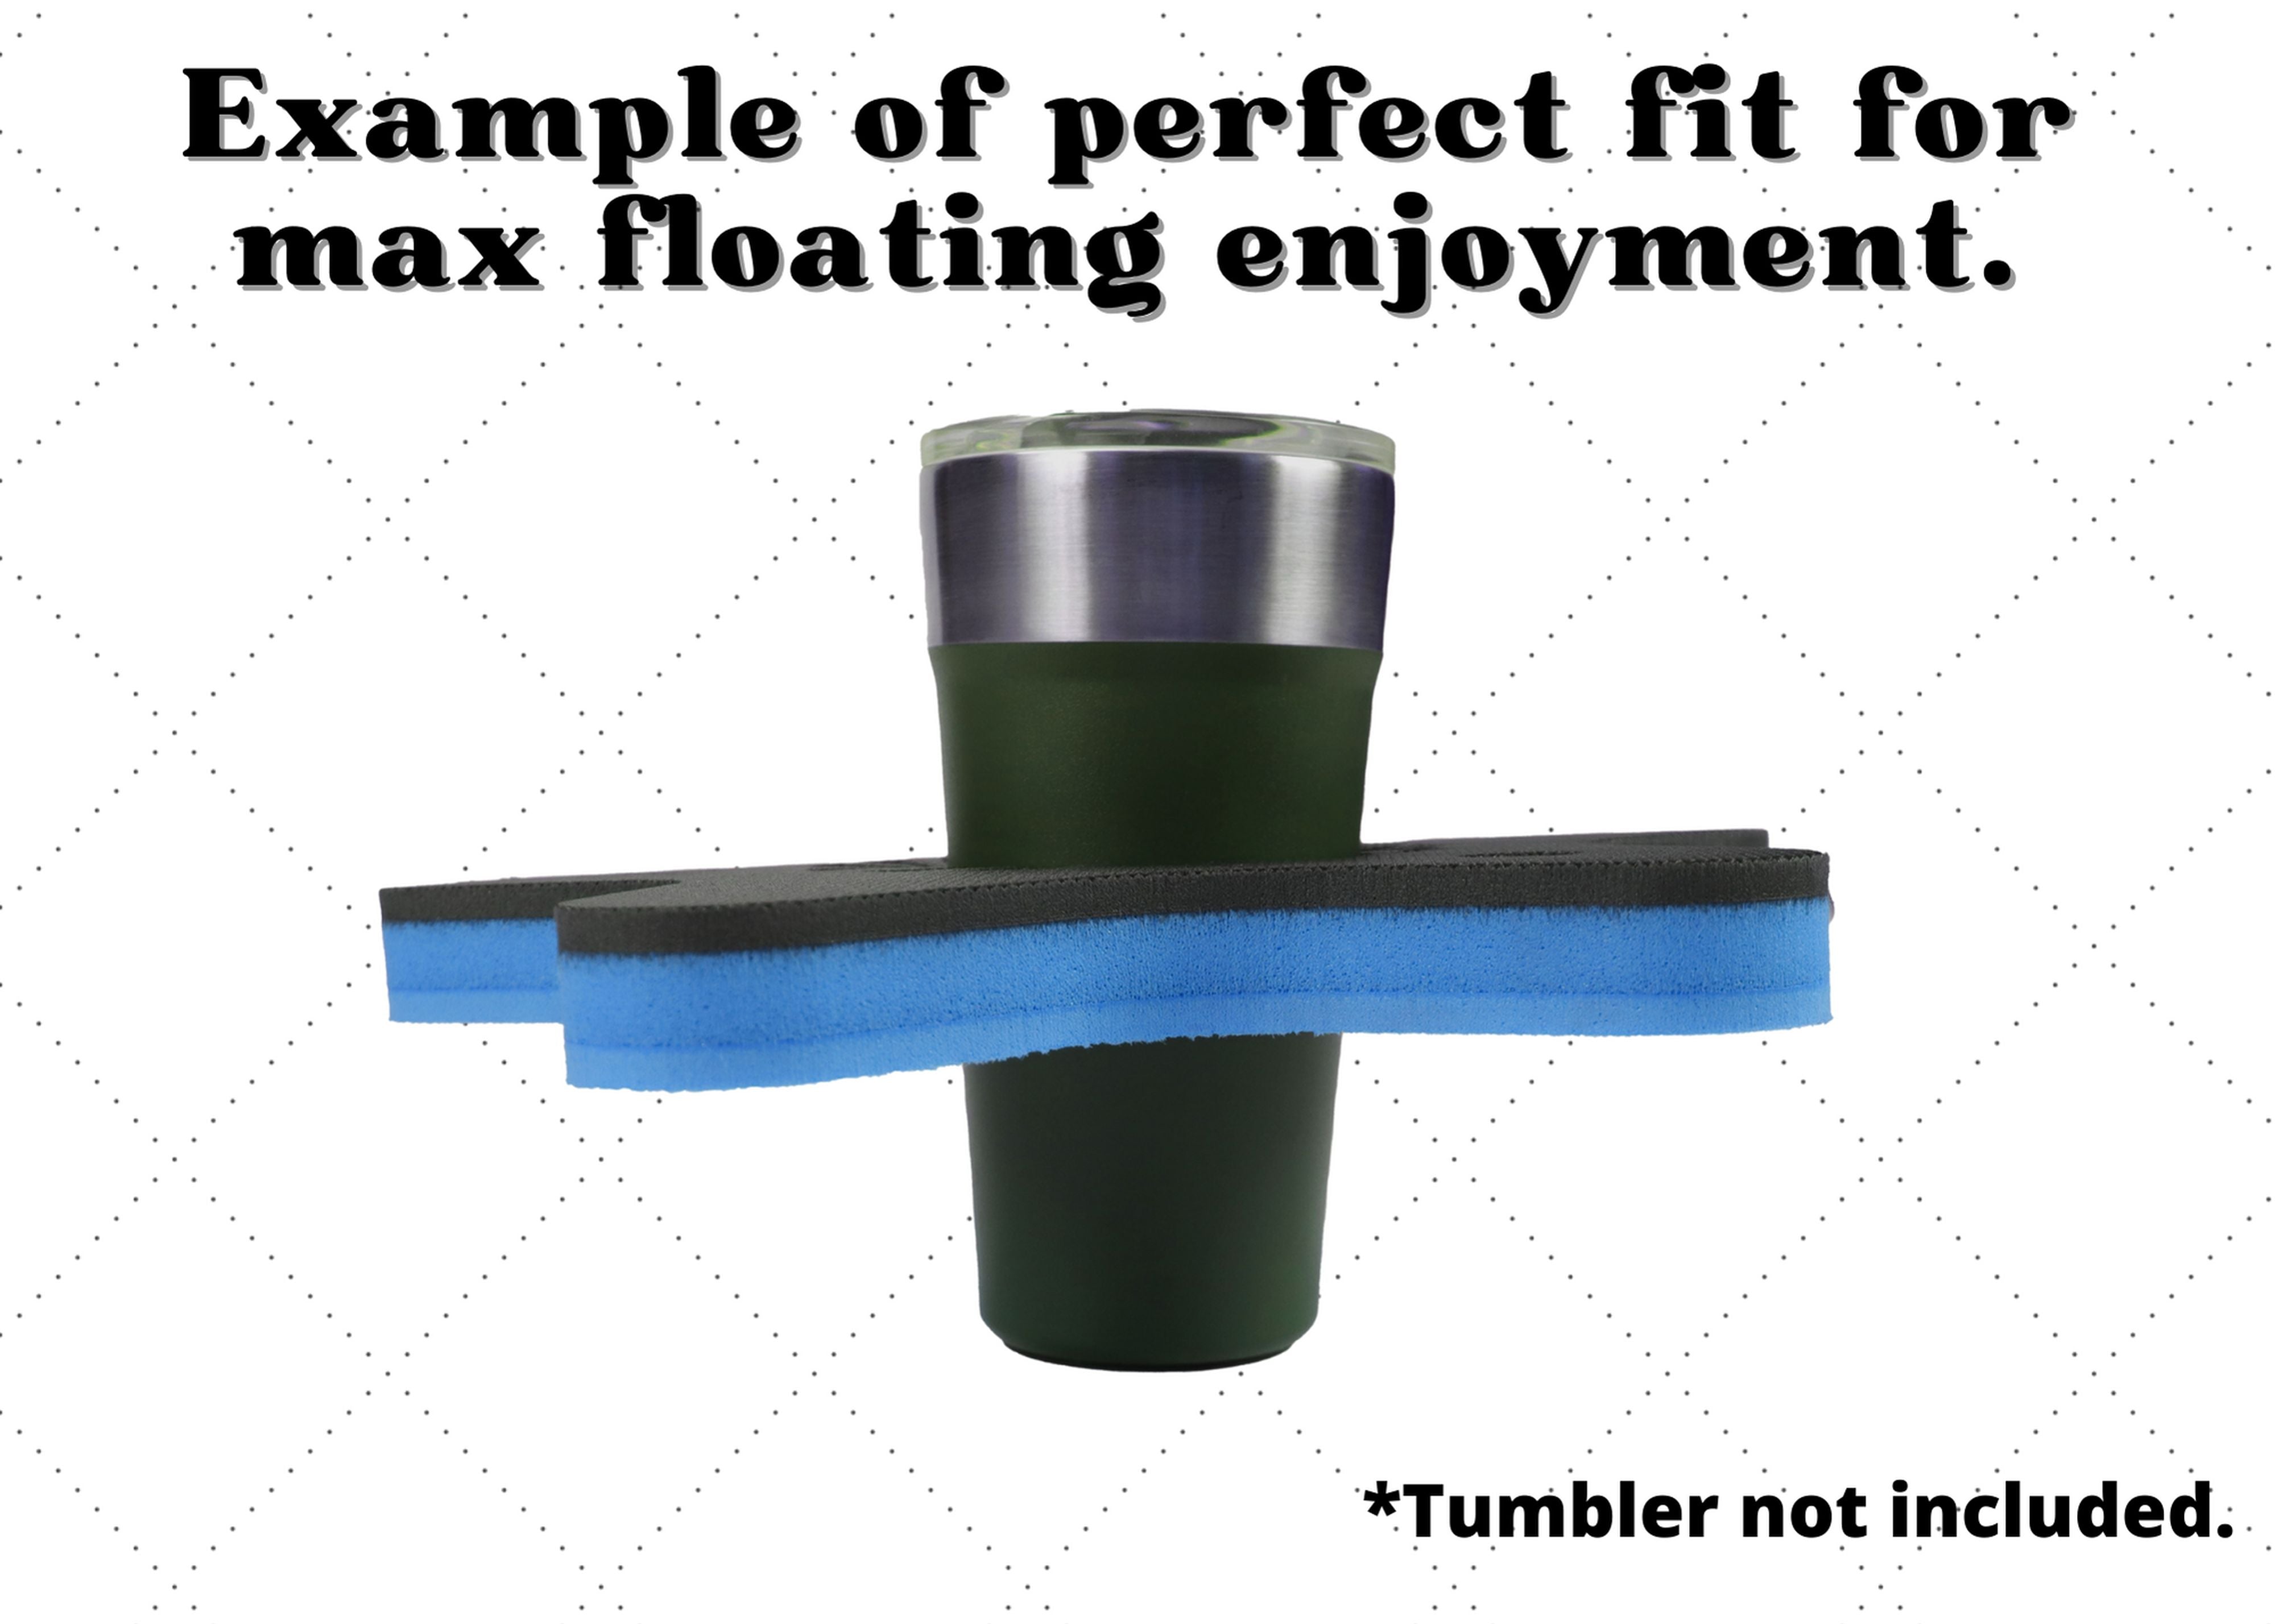 Universal Starfish Tumbler Holder Floating Drink Pool Durable 11.23 Inches fits 16 to 30 Ounce Compatible with YETI Ozark Trail RTIC One Size Fits All